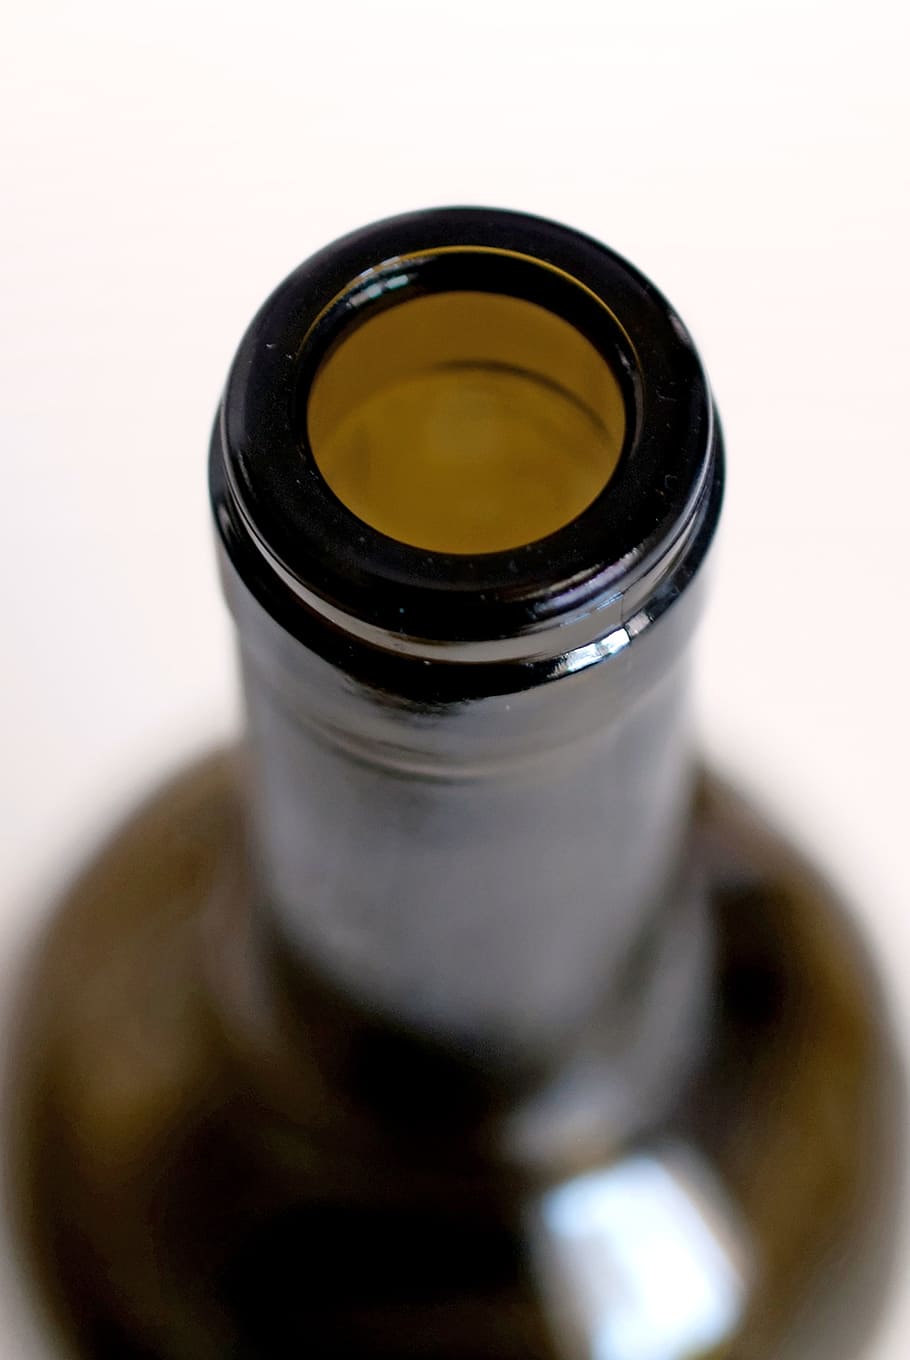 wine, bottle, bottleneck, open, close-up, detail, indoors, still life, container, photography themes